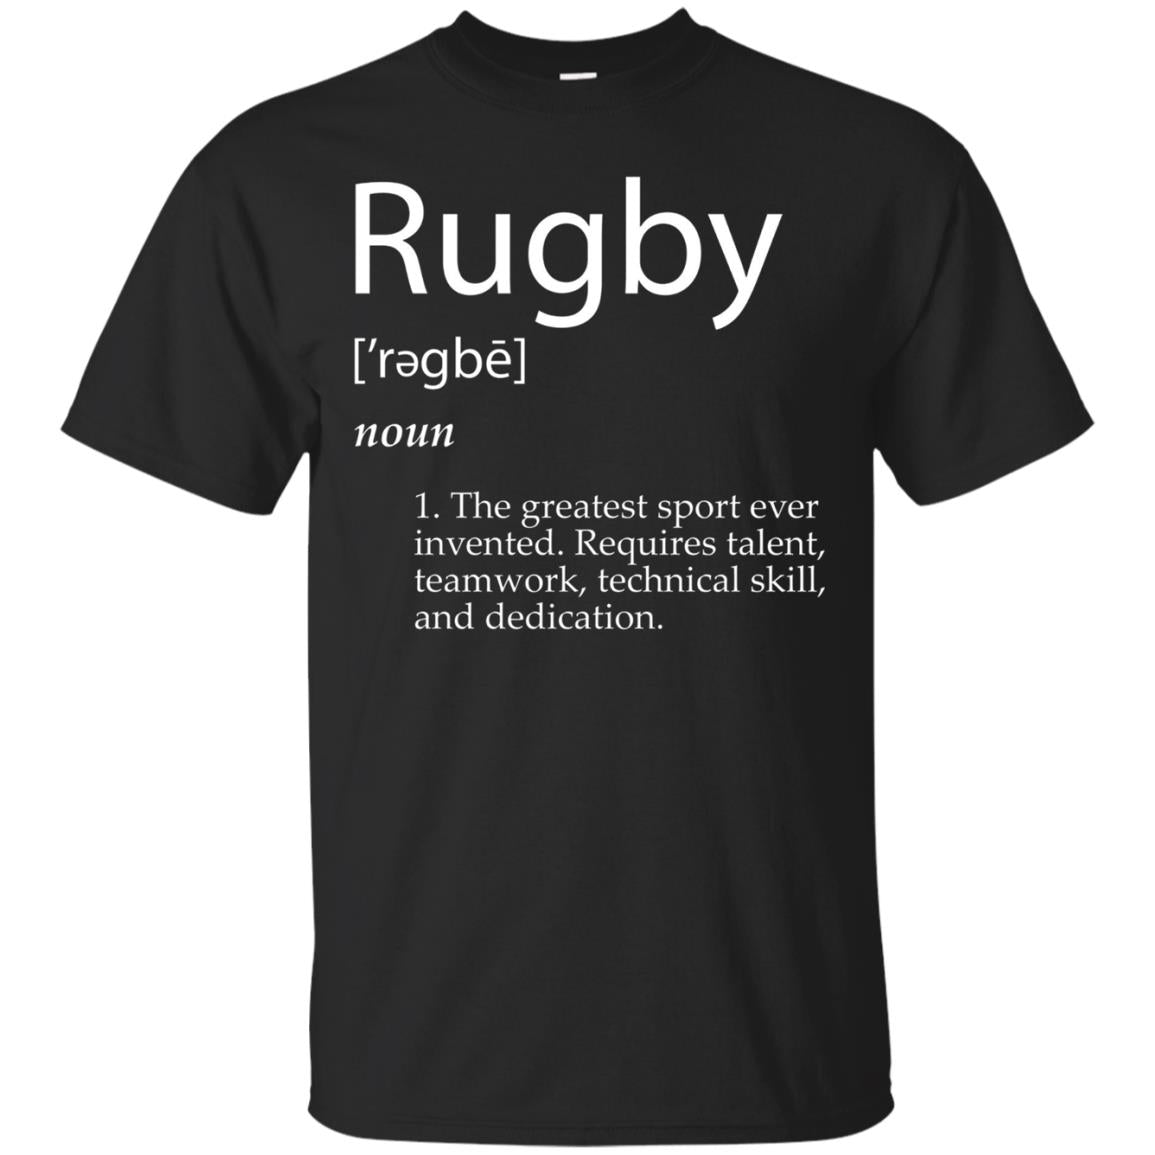 Rugby Definition T-shirt - + S Colors